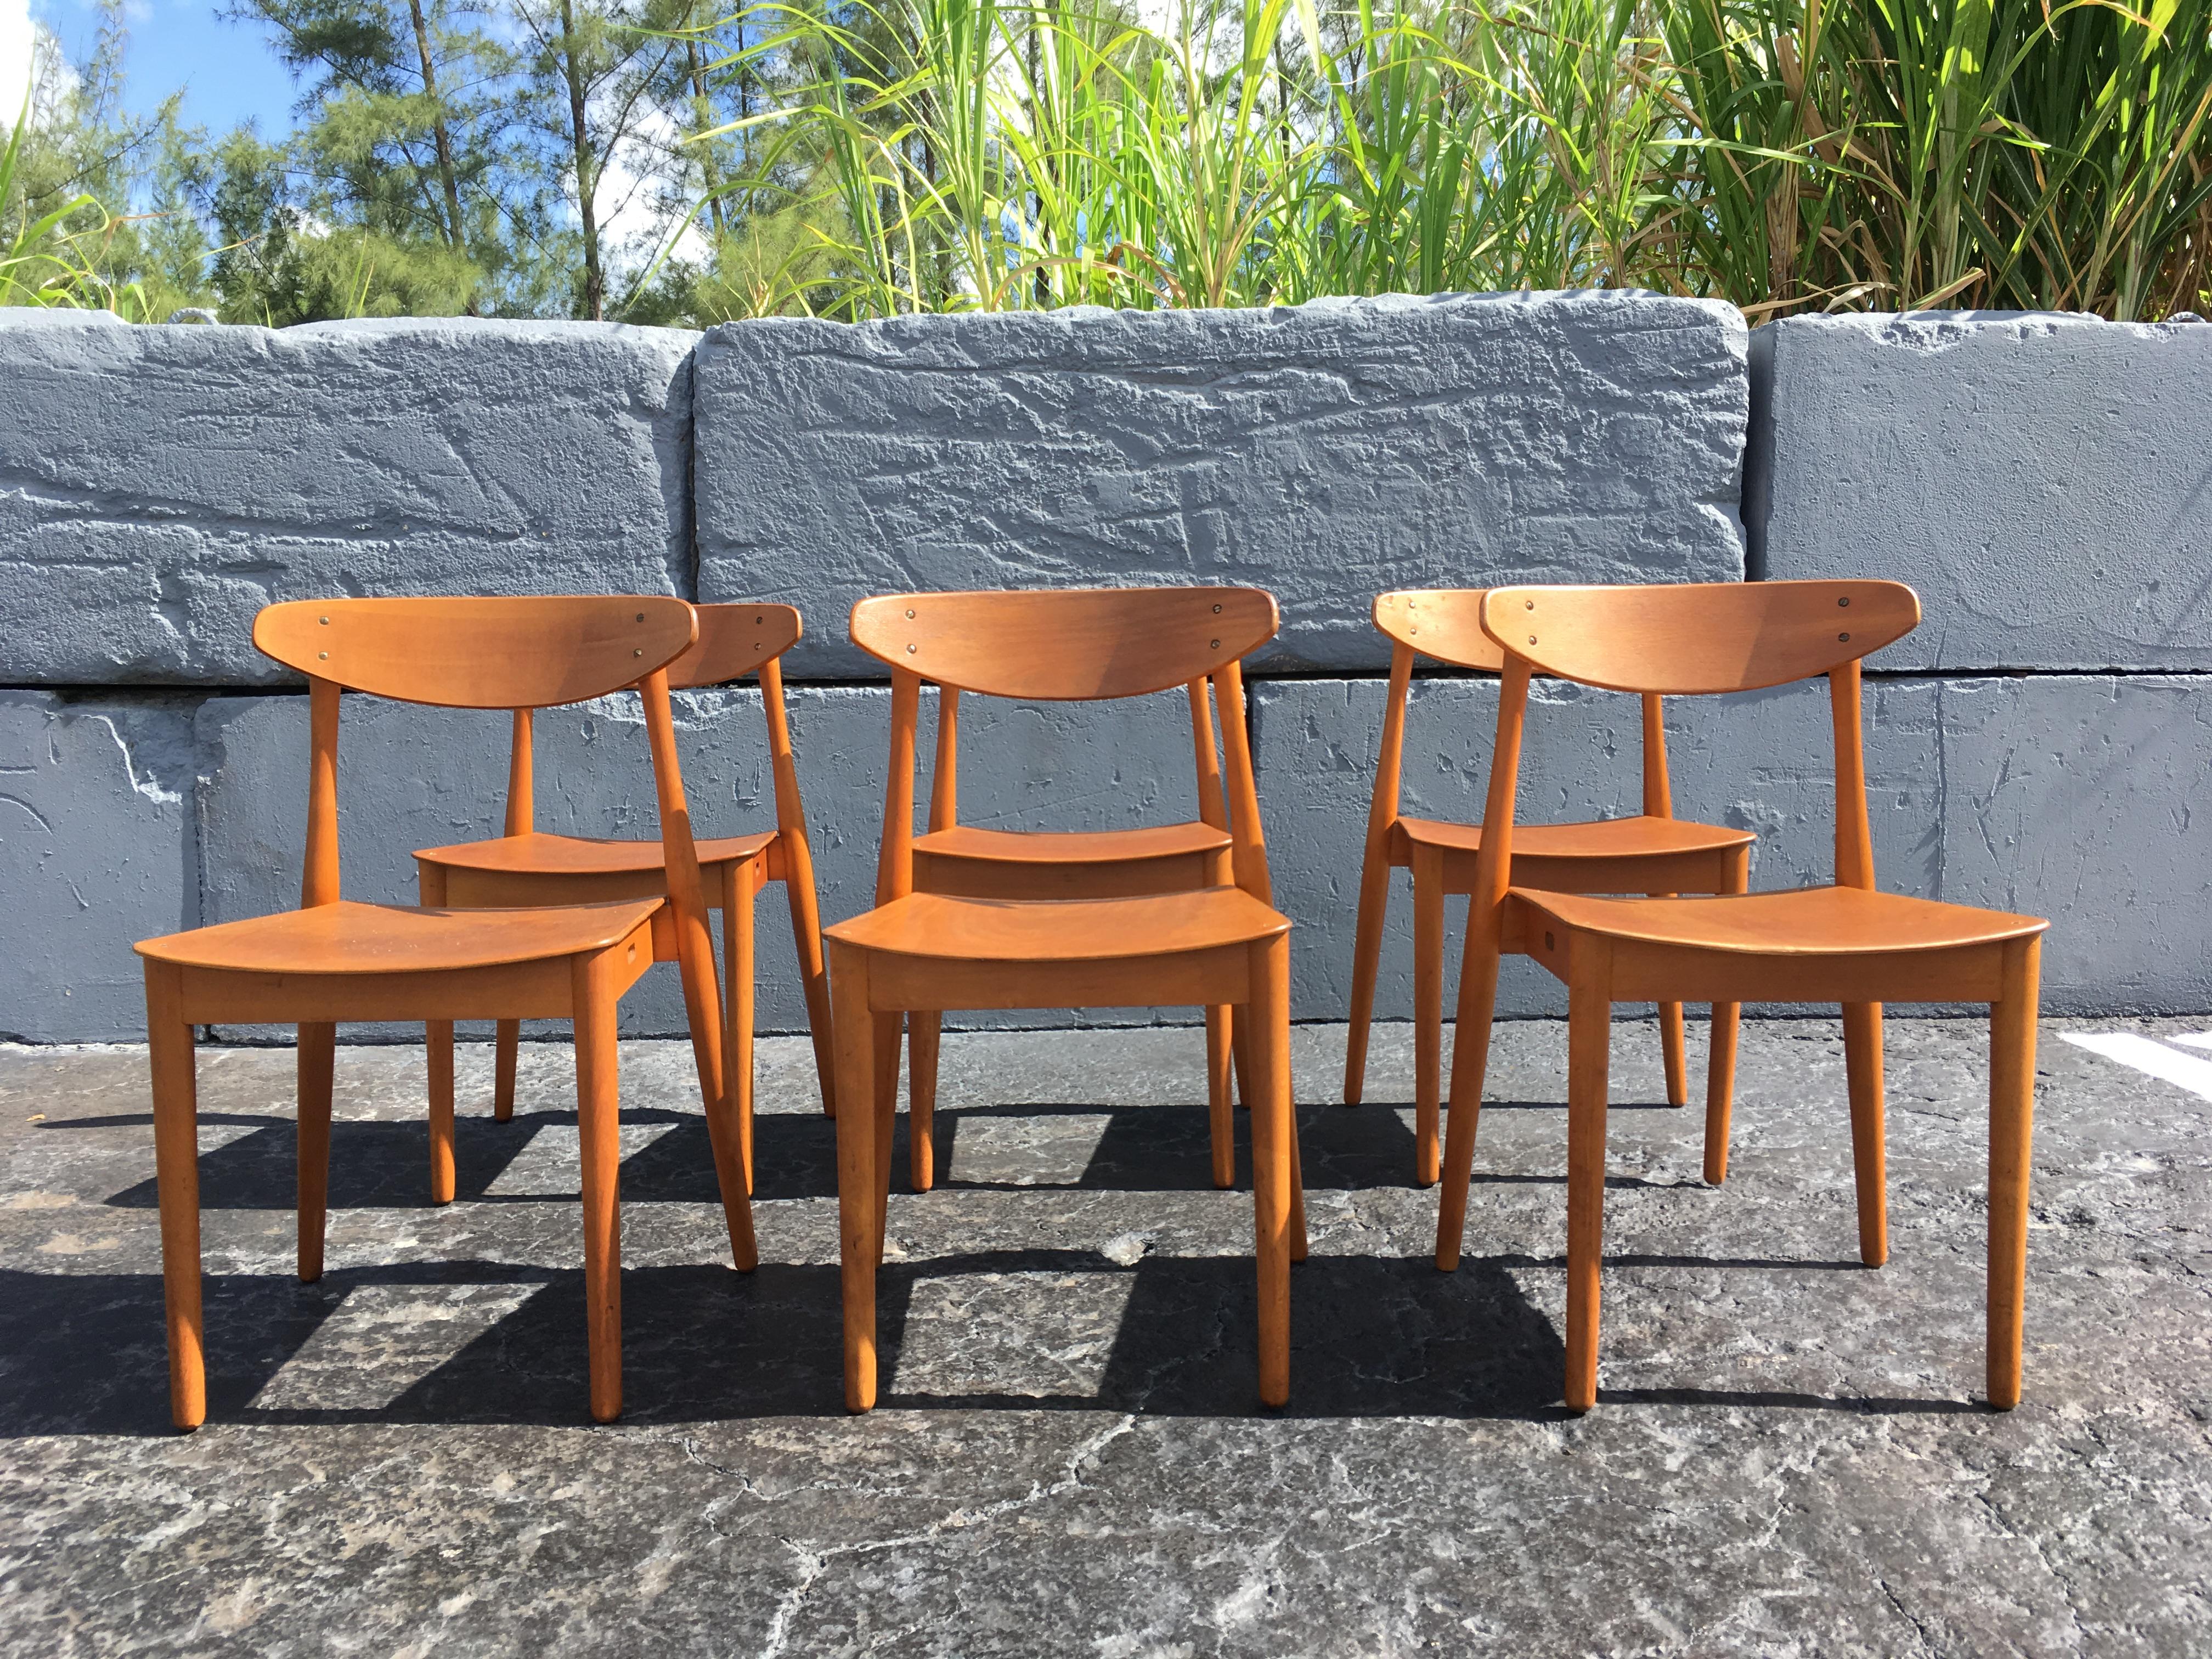 6 beautiful Danish dining chairs with bentwood seats and backs. Chairs are stackable.